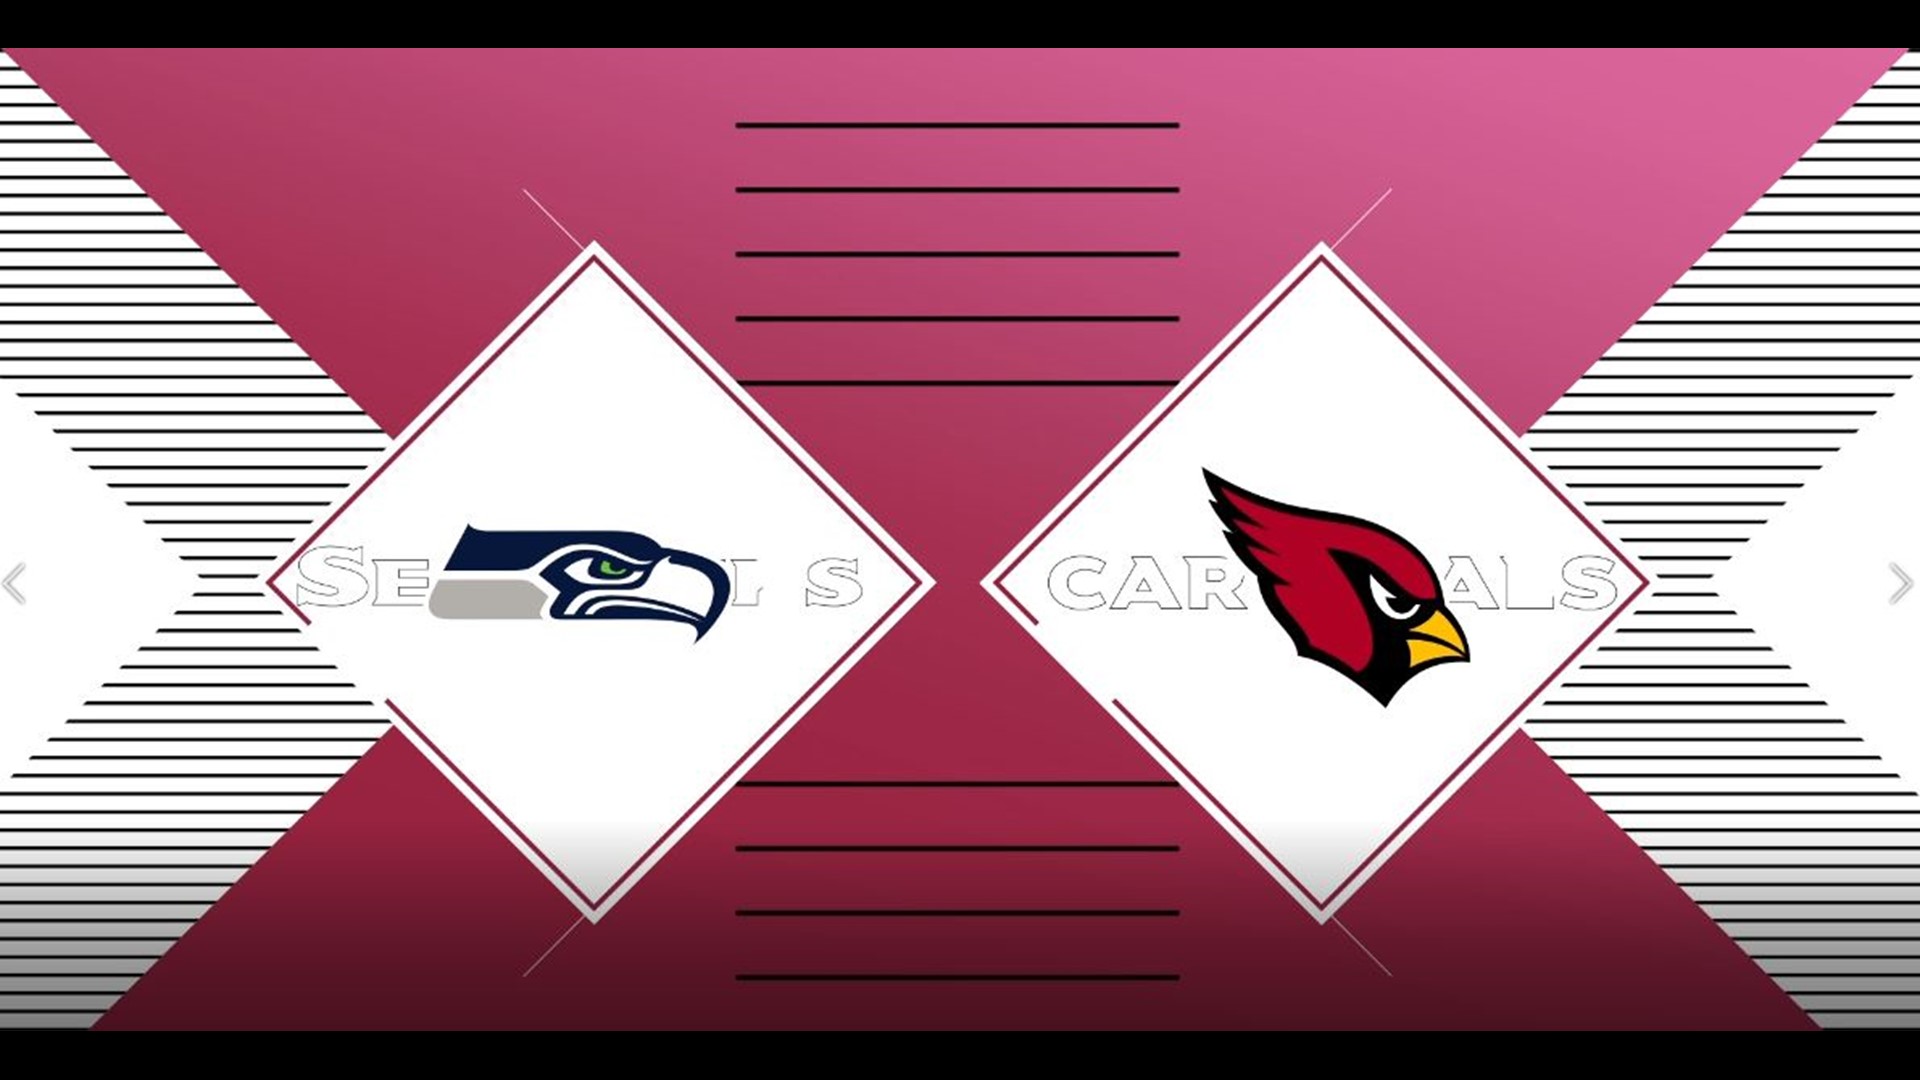 KING 5'S Paul Silvi and Joe Fann from NBC Sports Northwest preview the Seahawks/Cardinals game